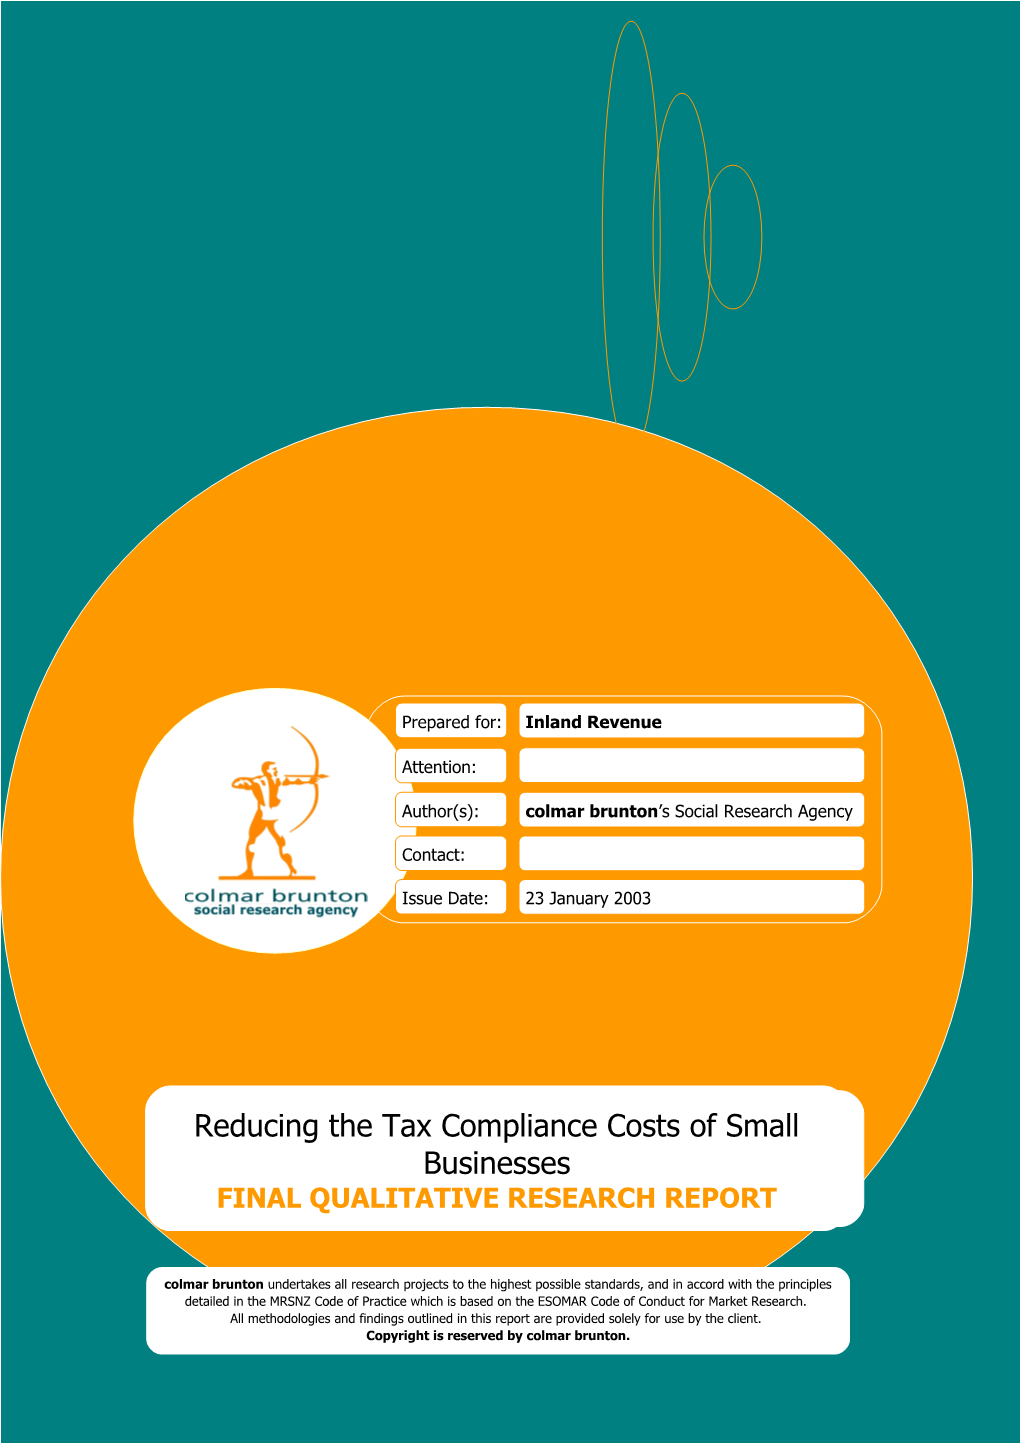 Final Qualitative Research Report: Reducing the Tax Compliance Costs of Small Businesses